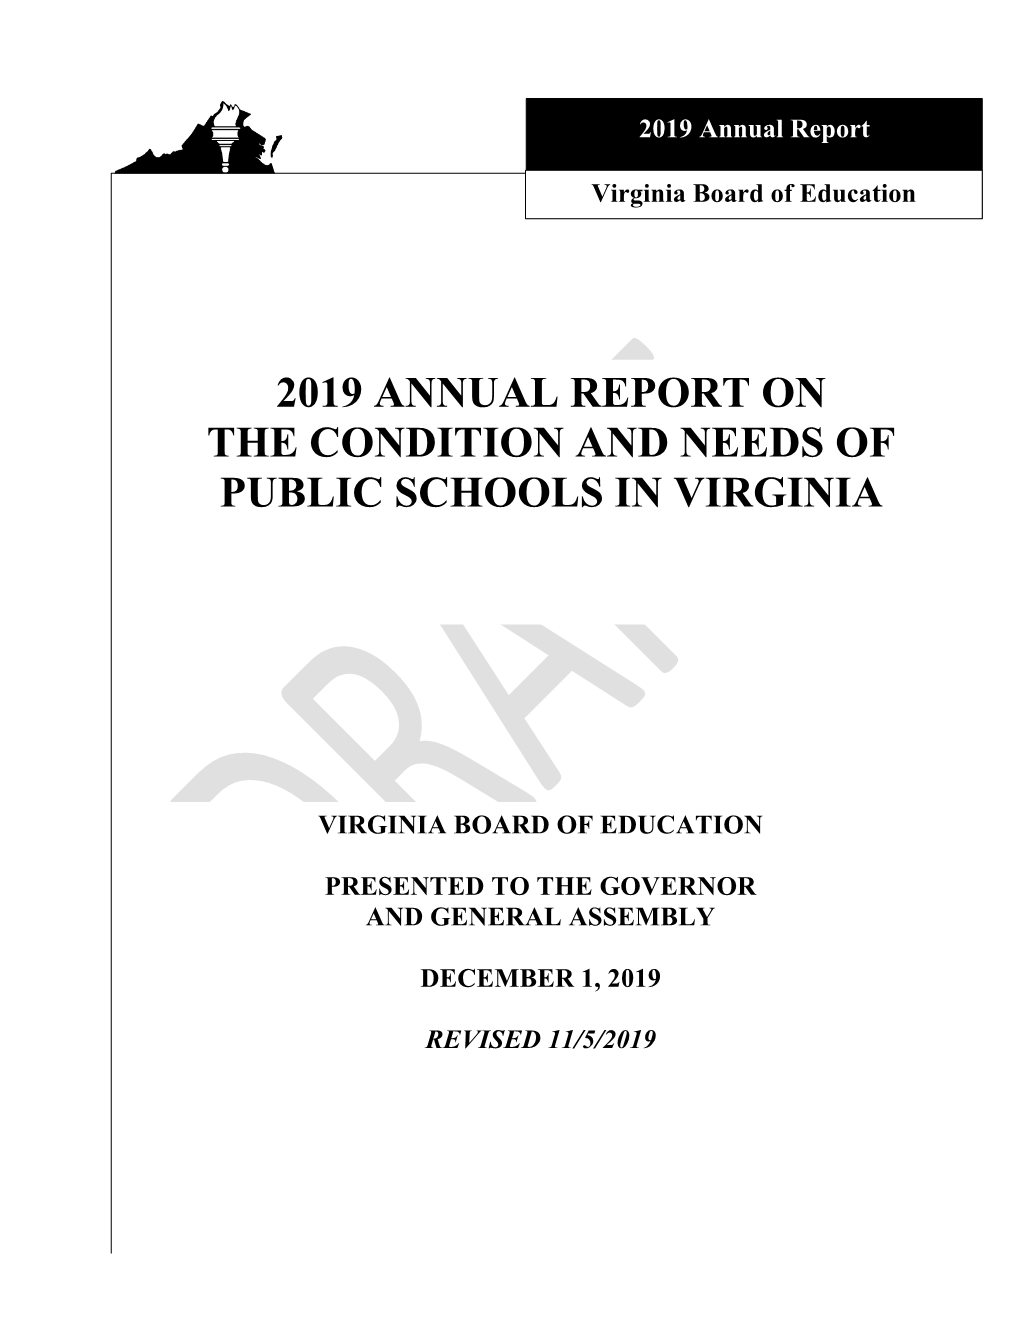 2019 Annual Report on the Condition and Needs of Public Schools in Virginia